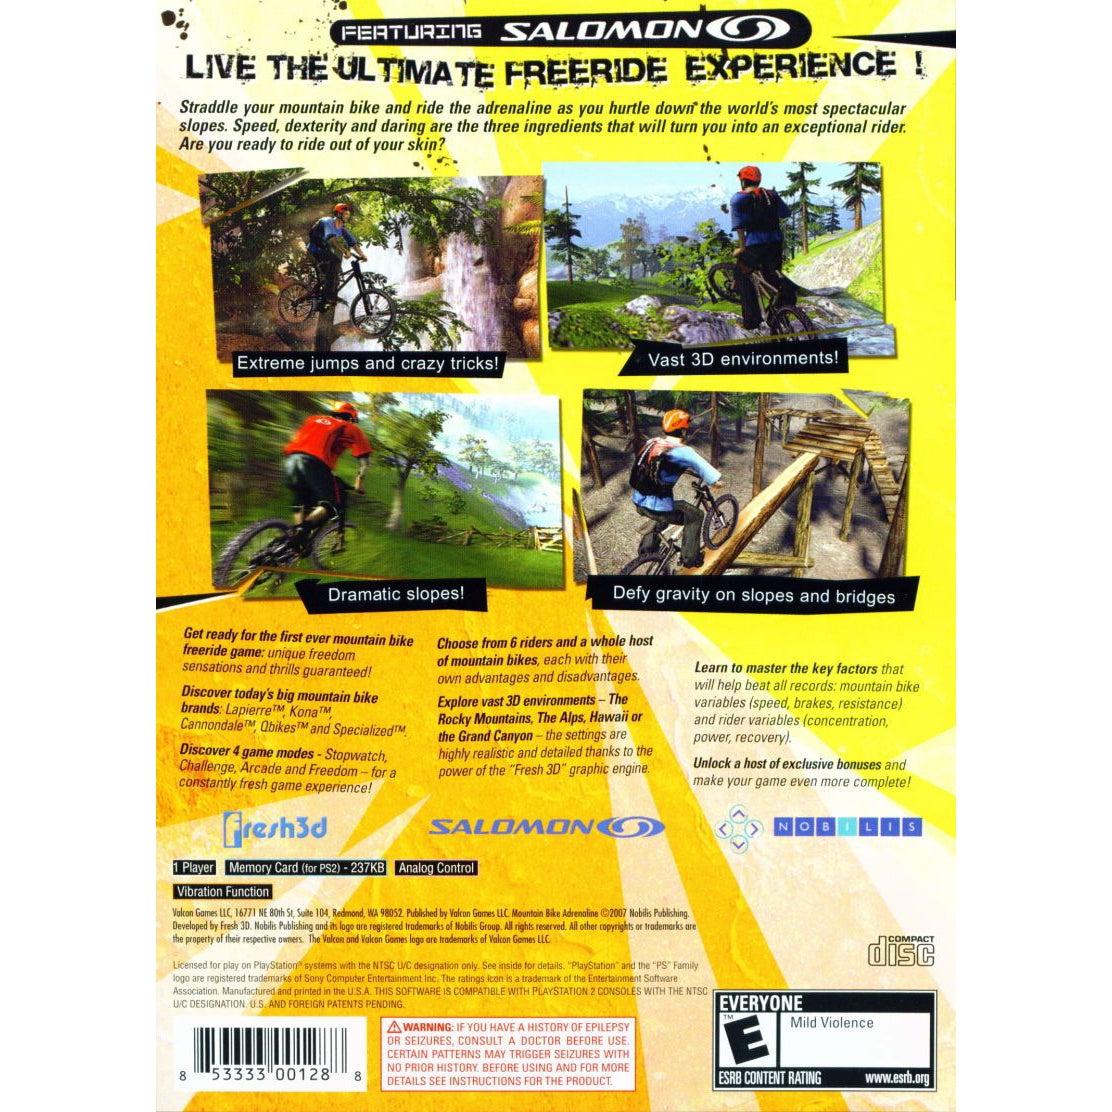 Mountain Bike Adrenaline - PlayStation 2 (PS2) Game Complete - YourGamingShop.com - Buy, Sell, Trade Video Games Online. 120 Day Warranty. Satisfaction Guaranteed.